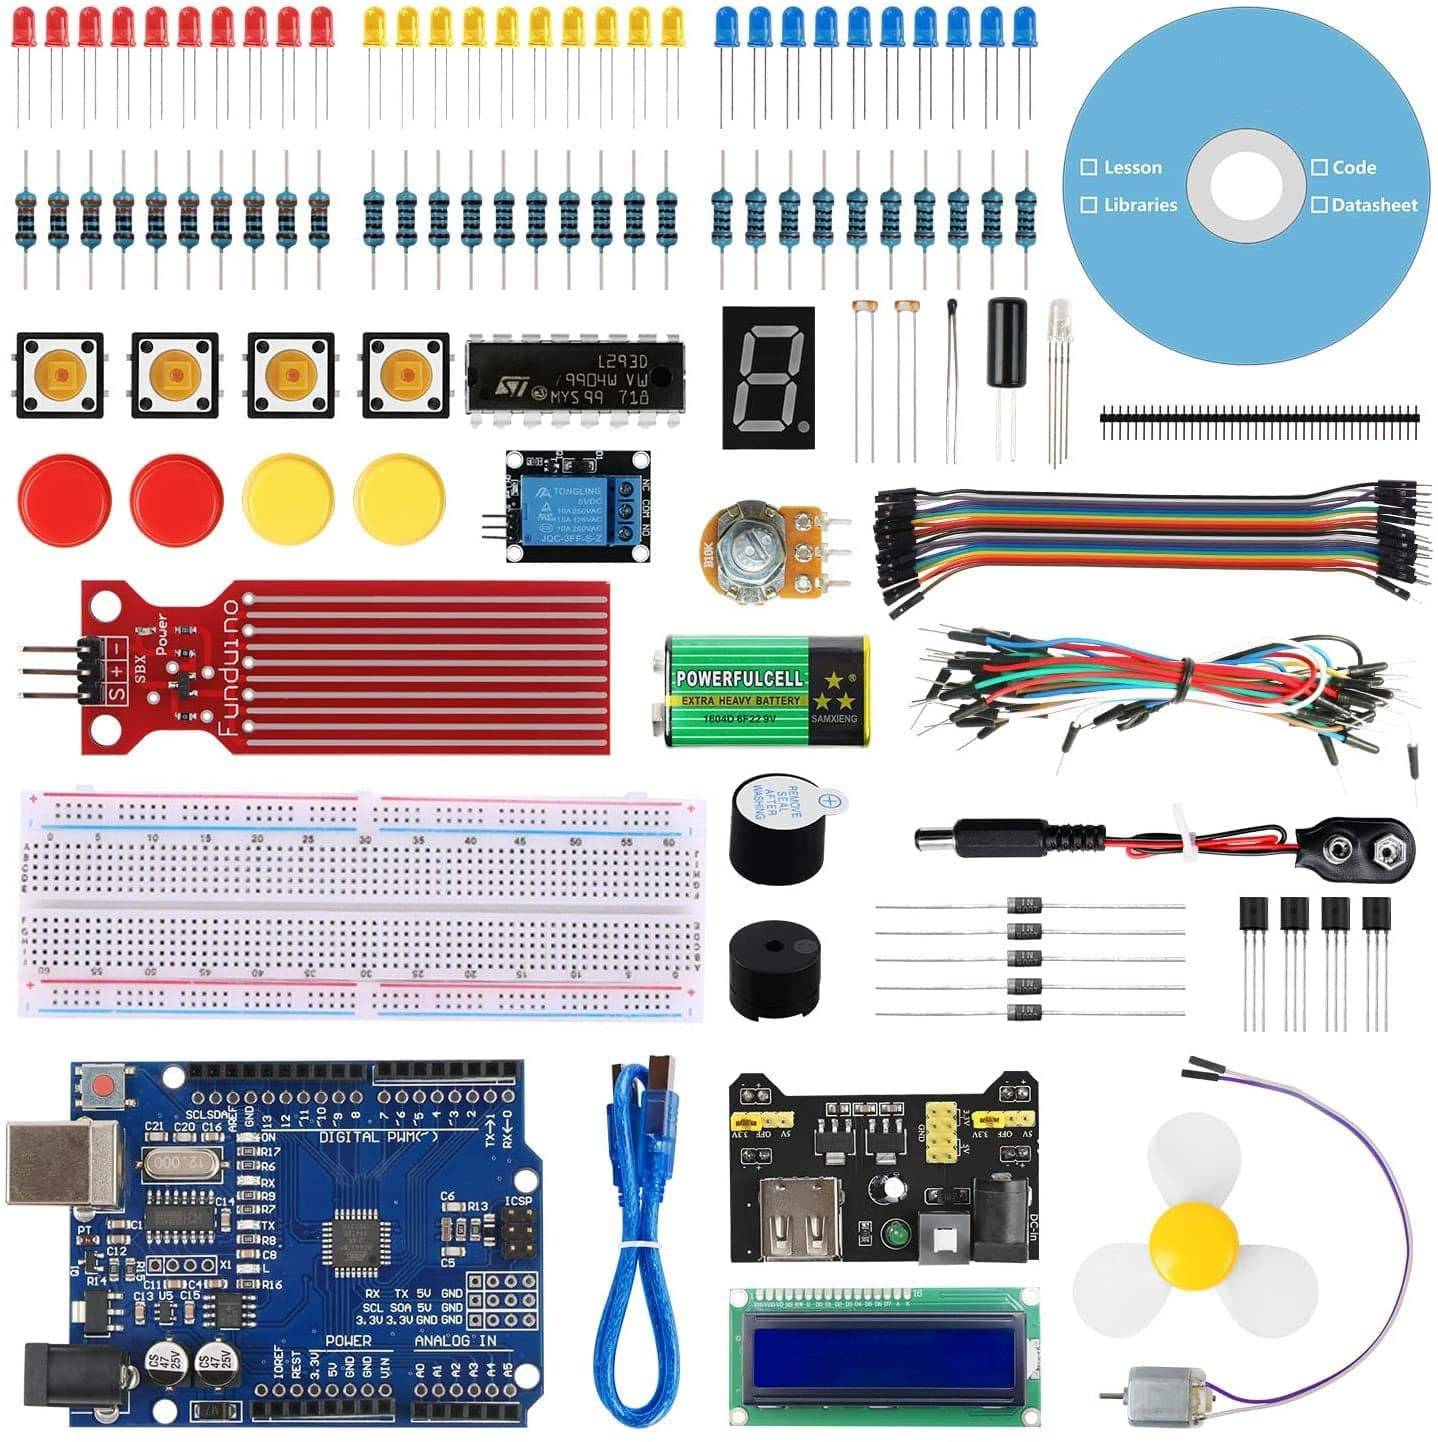 Scratch Starter Kit,Super Base Kit for Arduino Smd UNO R3 ATmega328P with 15 Lessons Tutorial - B09SQ9MXM5 - REES52